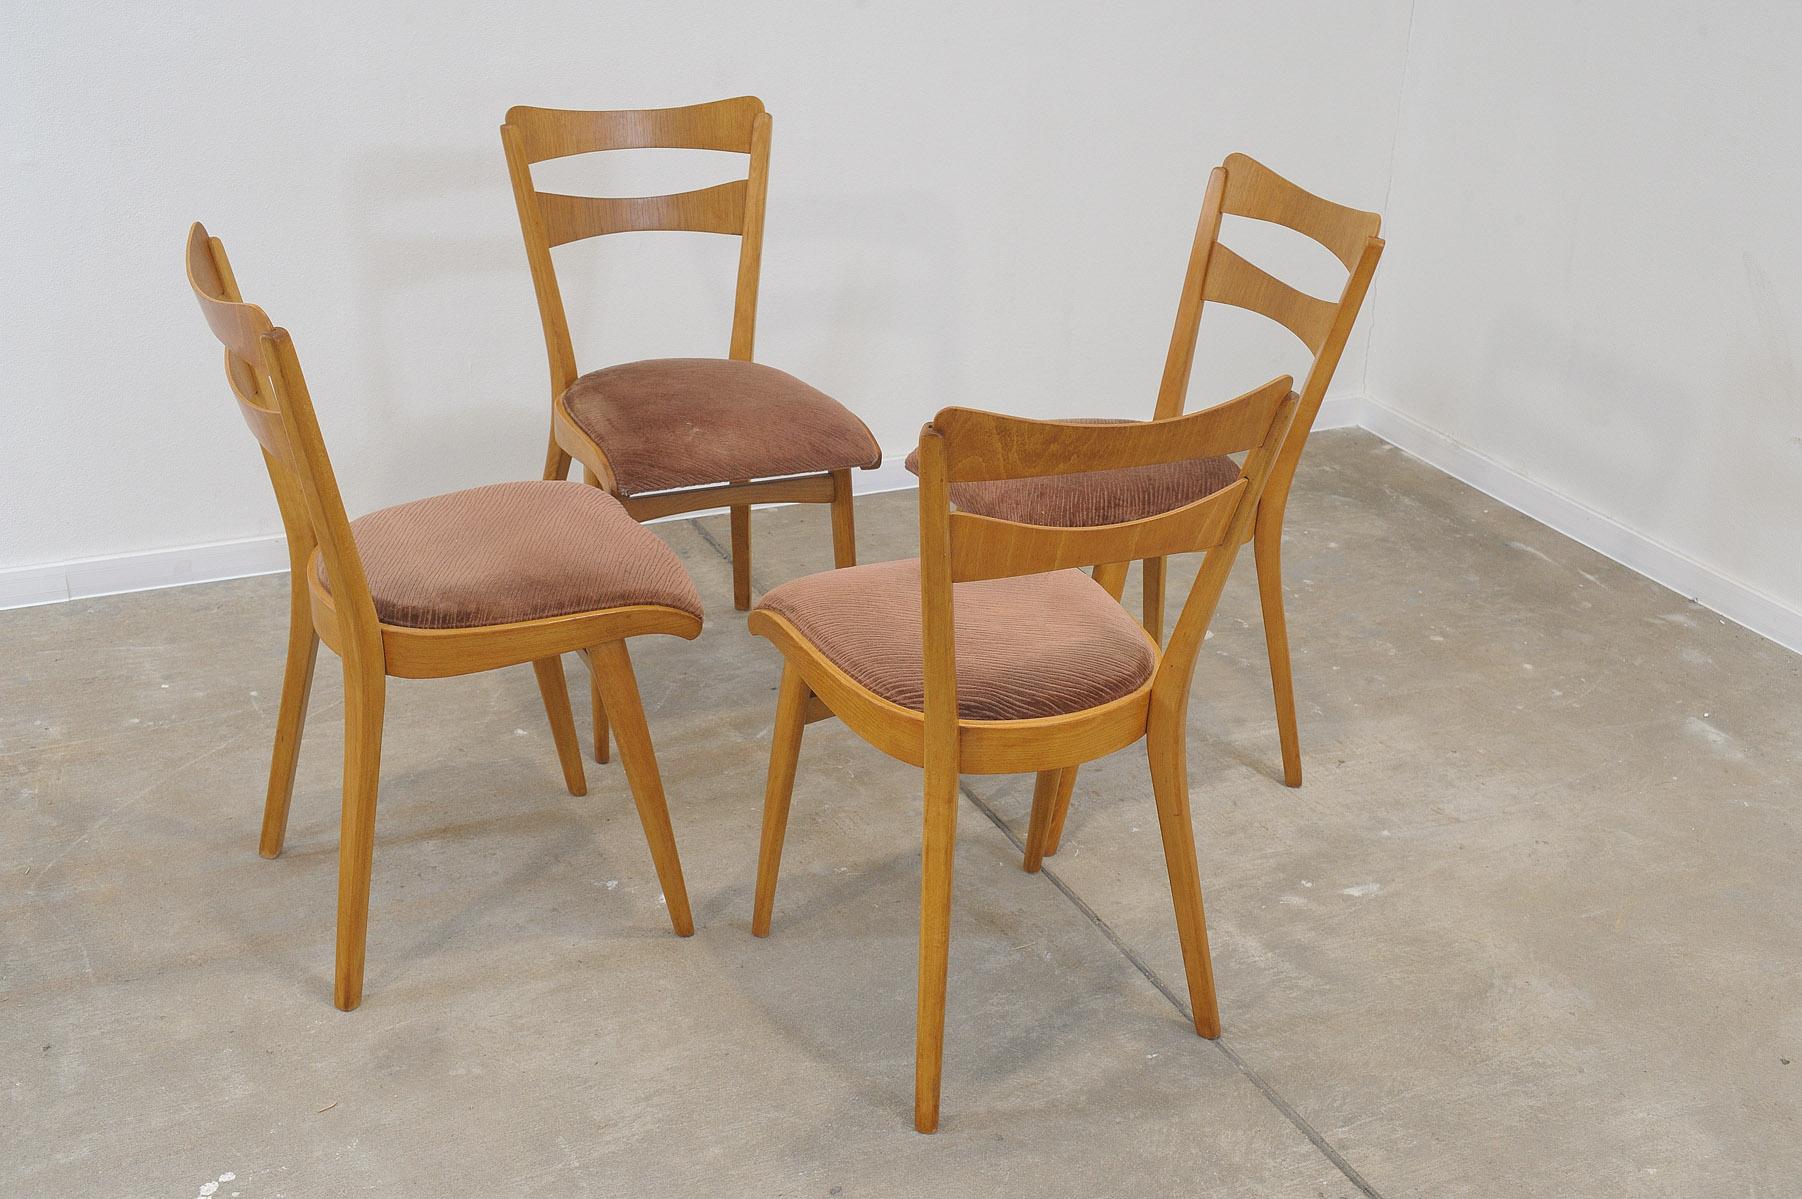 Set of four midcentury upholstered dining chairs, made in the former Czechoslovakia by Tatra nábytok company in the 1960s. The chairs are constructed of beech wood. Very interesting shaping. The upholstery and wood are in very good condition. Price